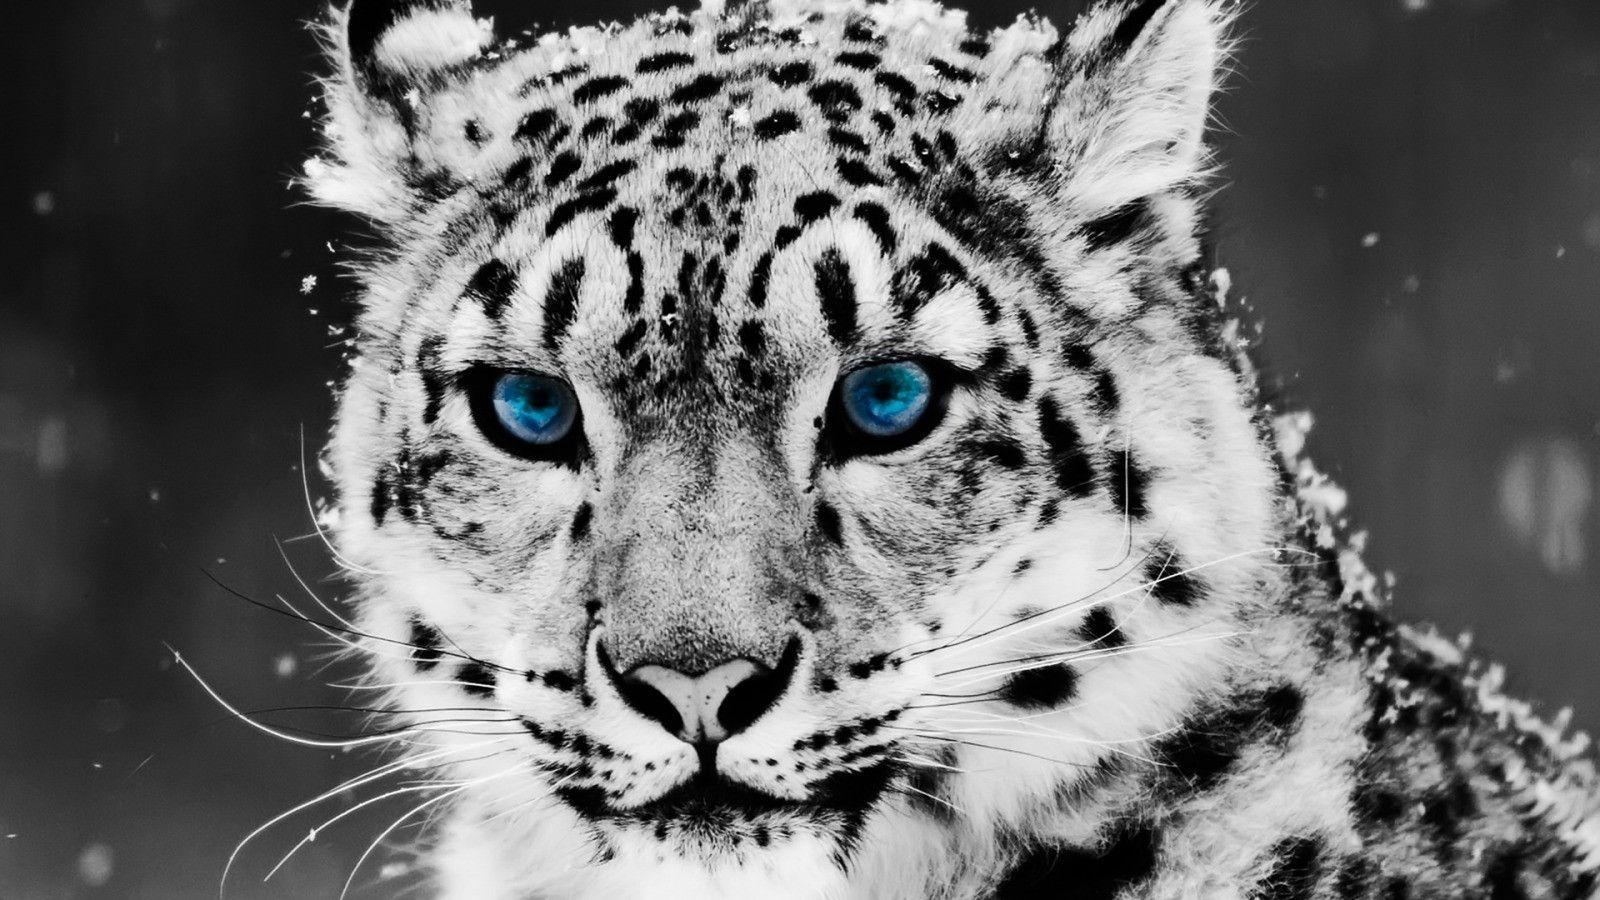 10 Latest Cool Wallpapers Of Animals FULL HD 1080p For PC Background